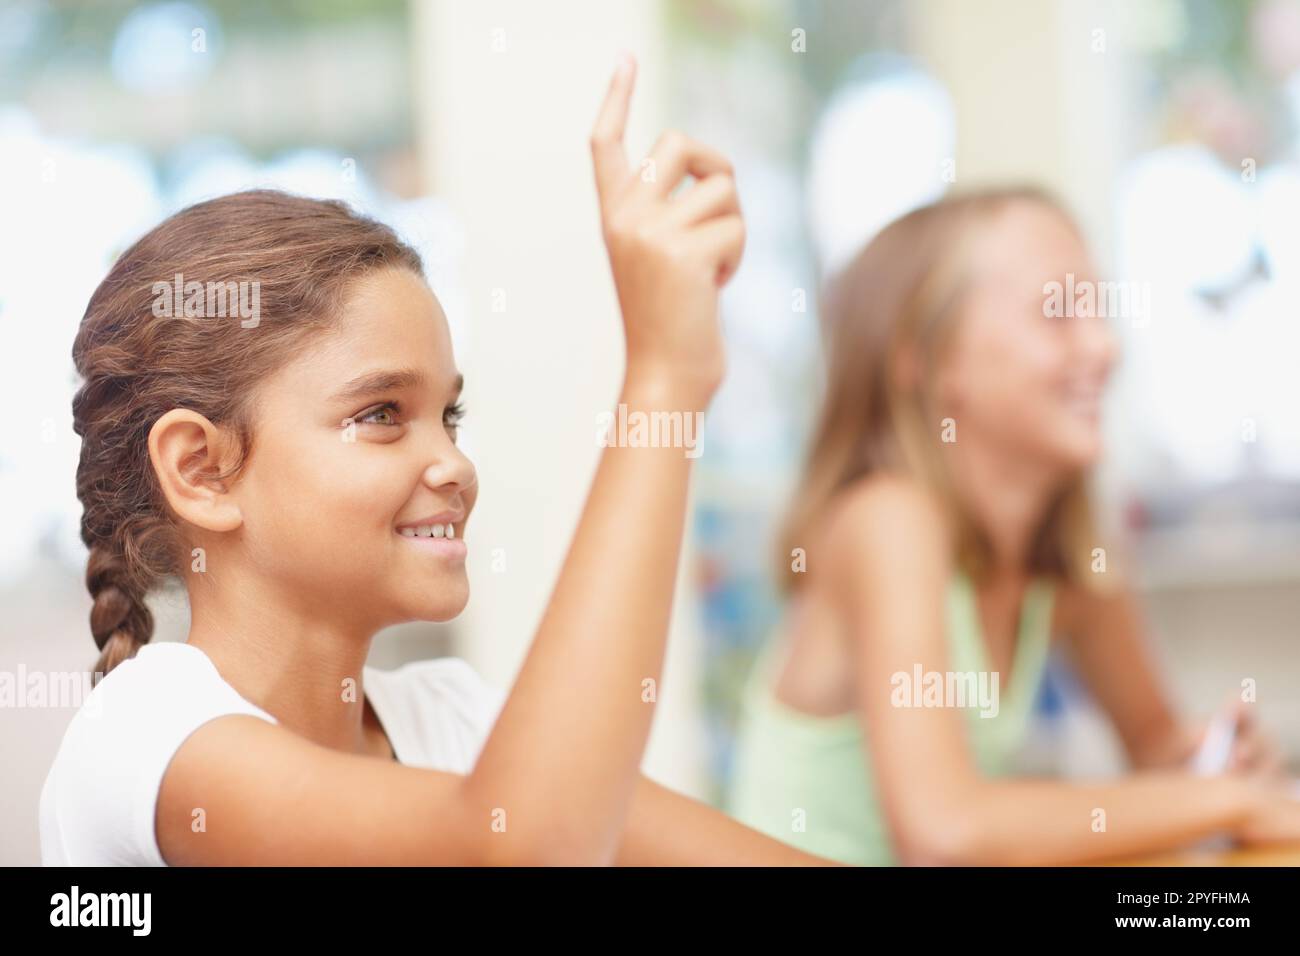 Lets hear what the youth have to say. Pretty young multi-ethnic schoolgirl raising her hand confidently in class - copyspace. Stock Photo